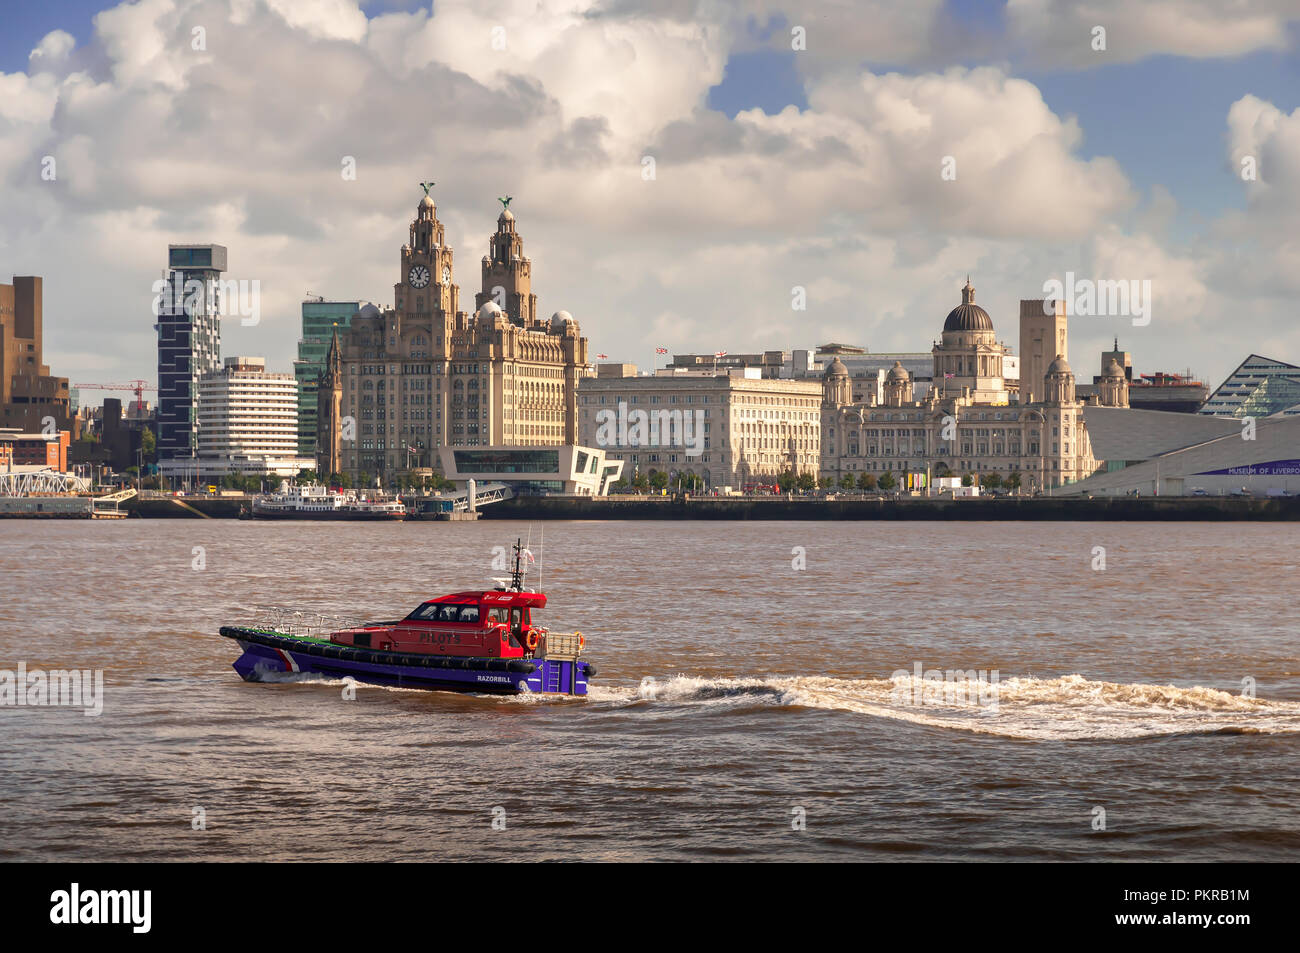 Liverpool pilot launch Razorbill with Liverpool waterfront. Stock Photo